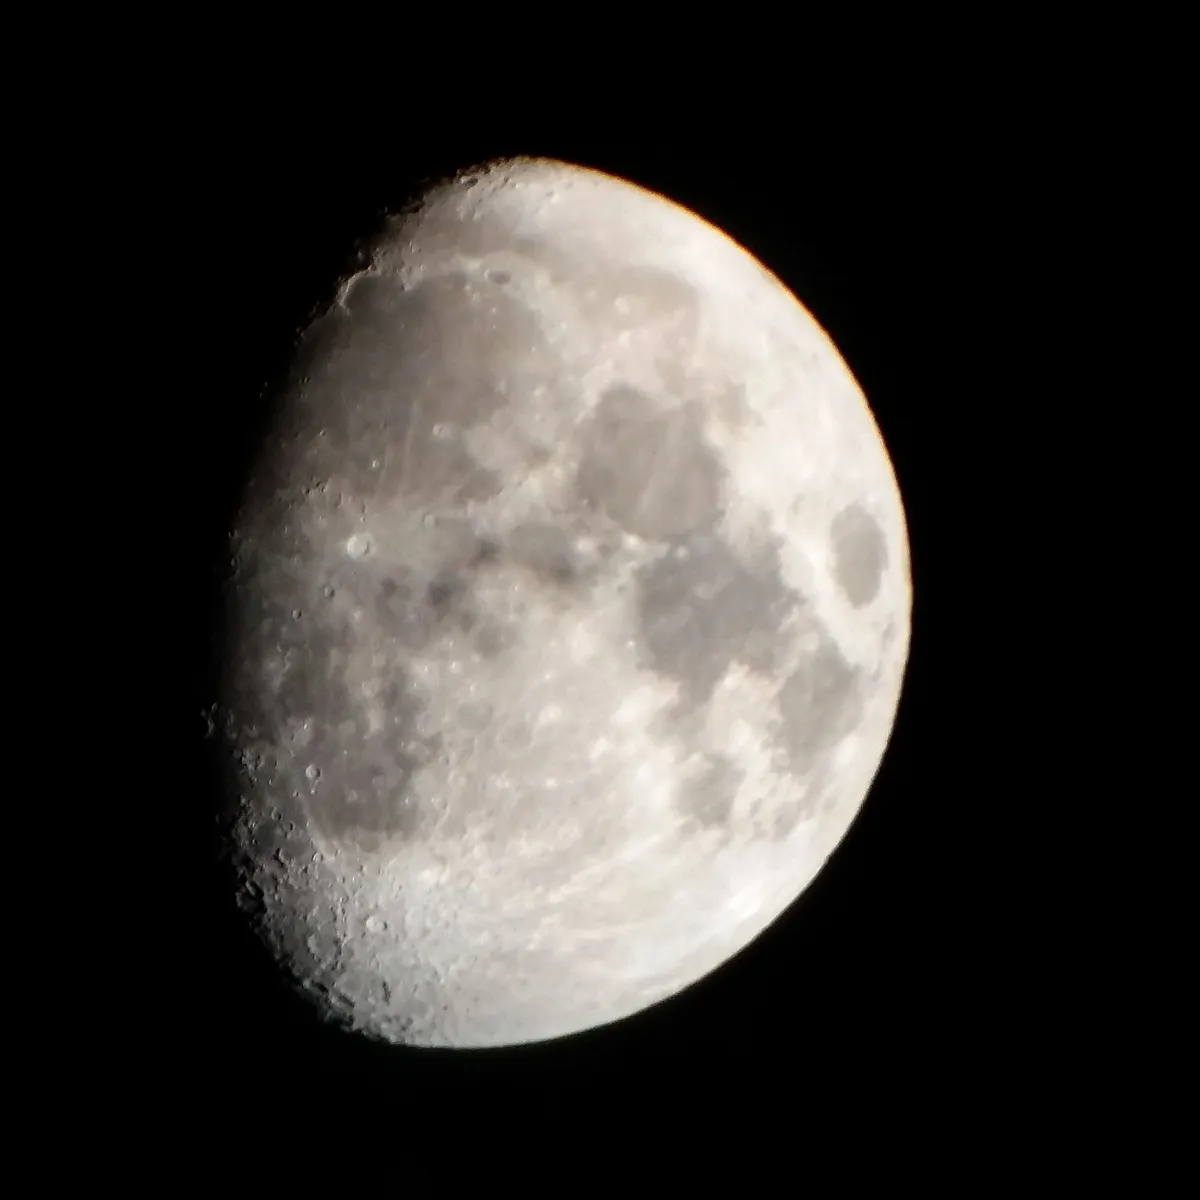 Gibbous Crescent (Part 2) by Nick, Long Island, NY, USA. Equipment: Celestron C70, Note 3